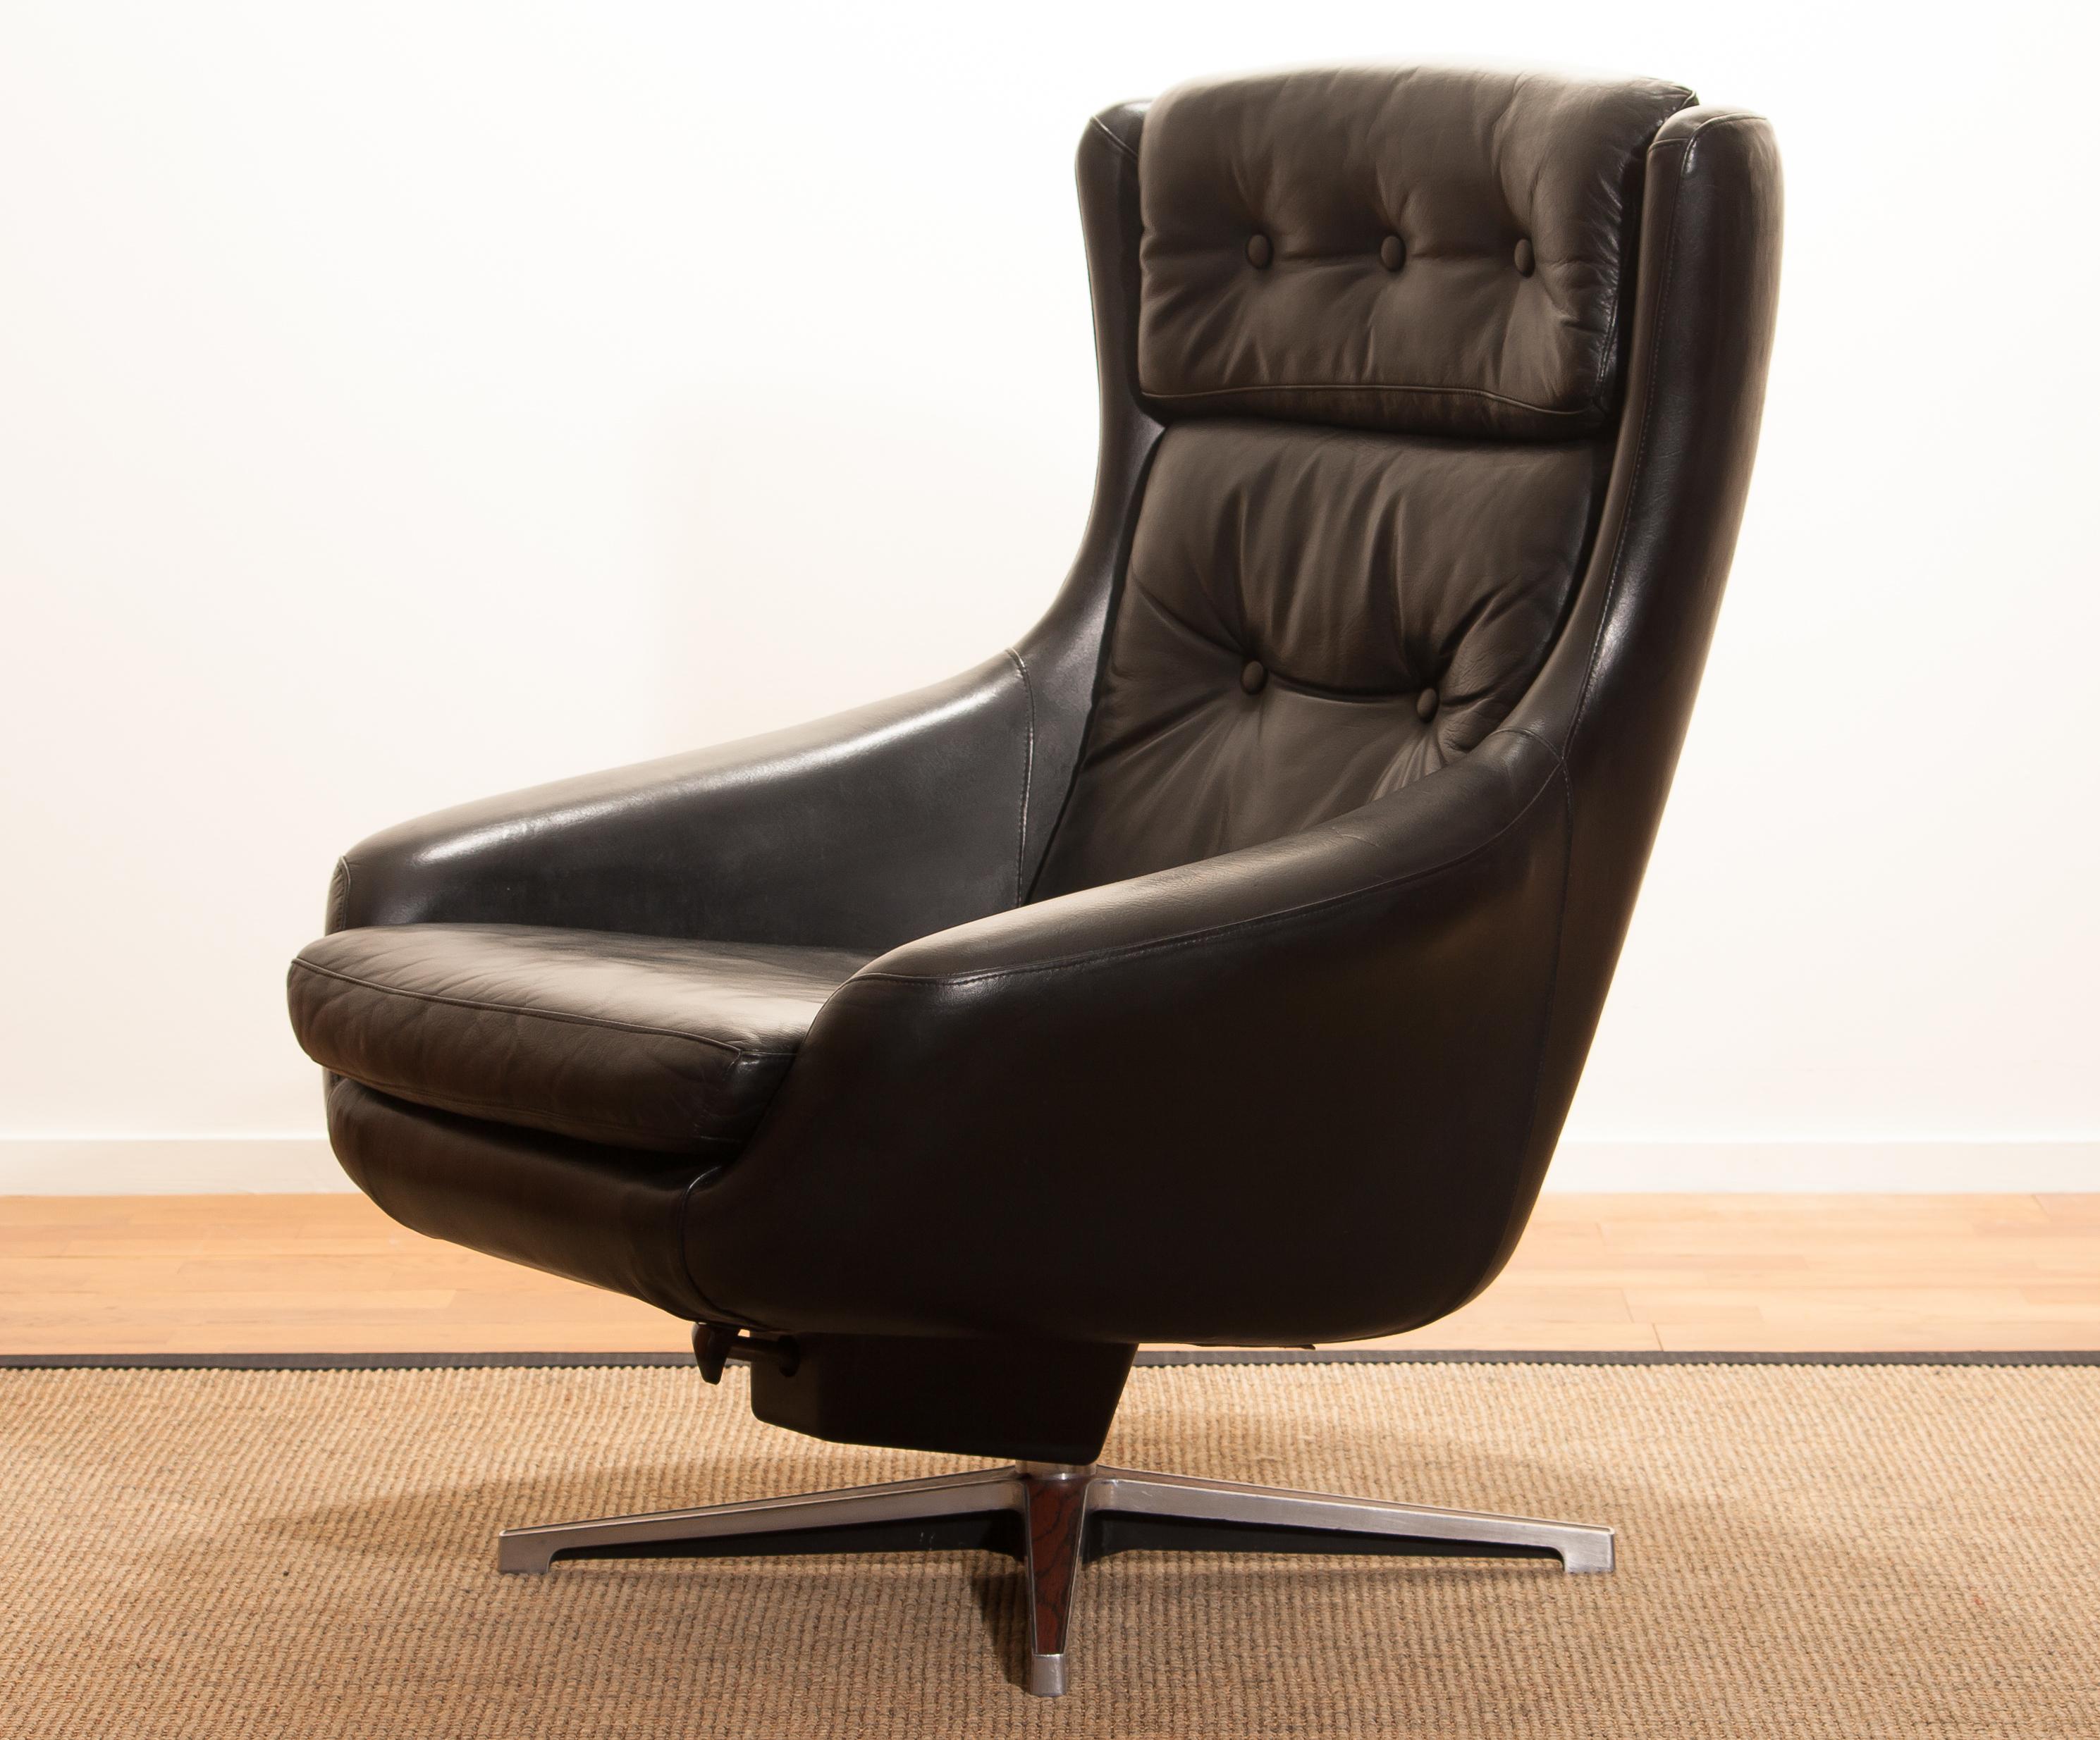 1960s, Black Leather Swivel Rocking Lounge Chair by Lennart Bender In Excellent Condition In Silvolde, Gelderland